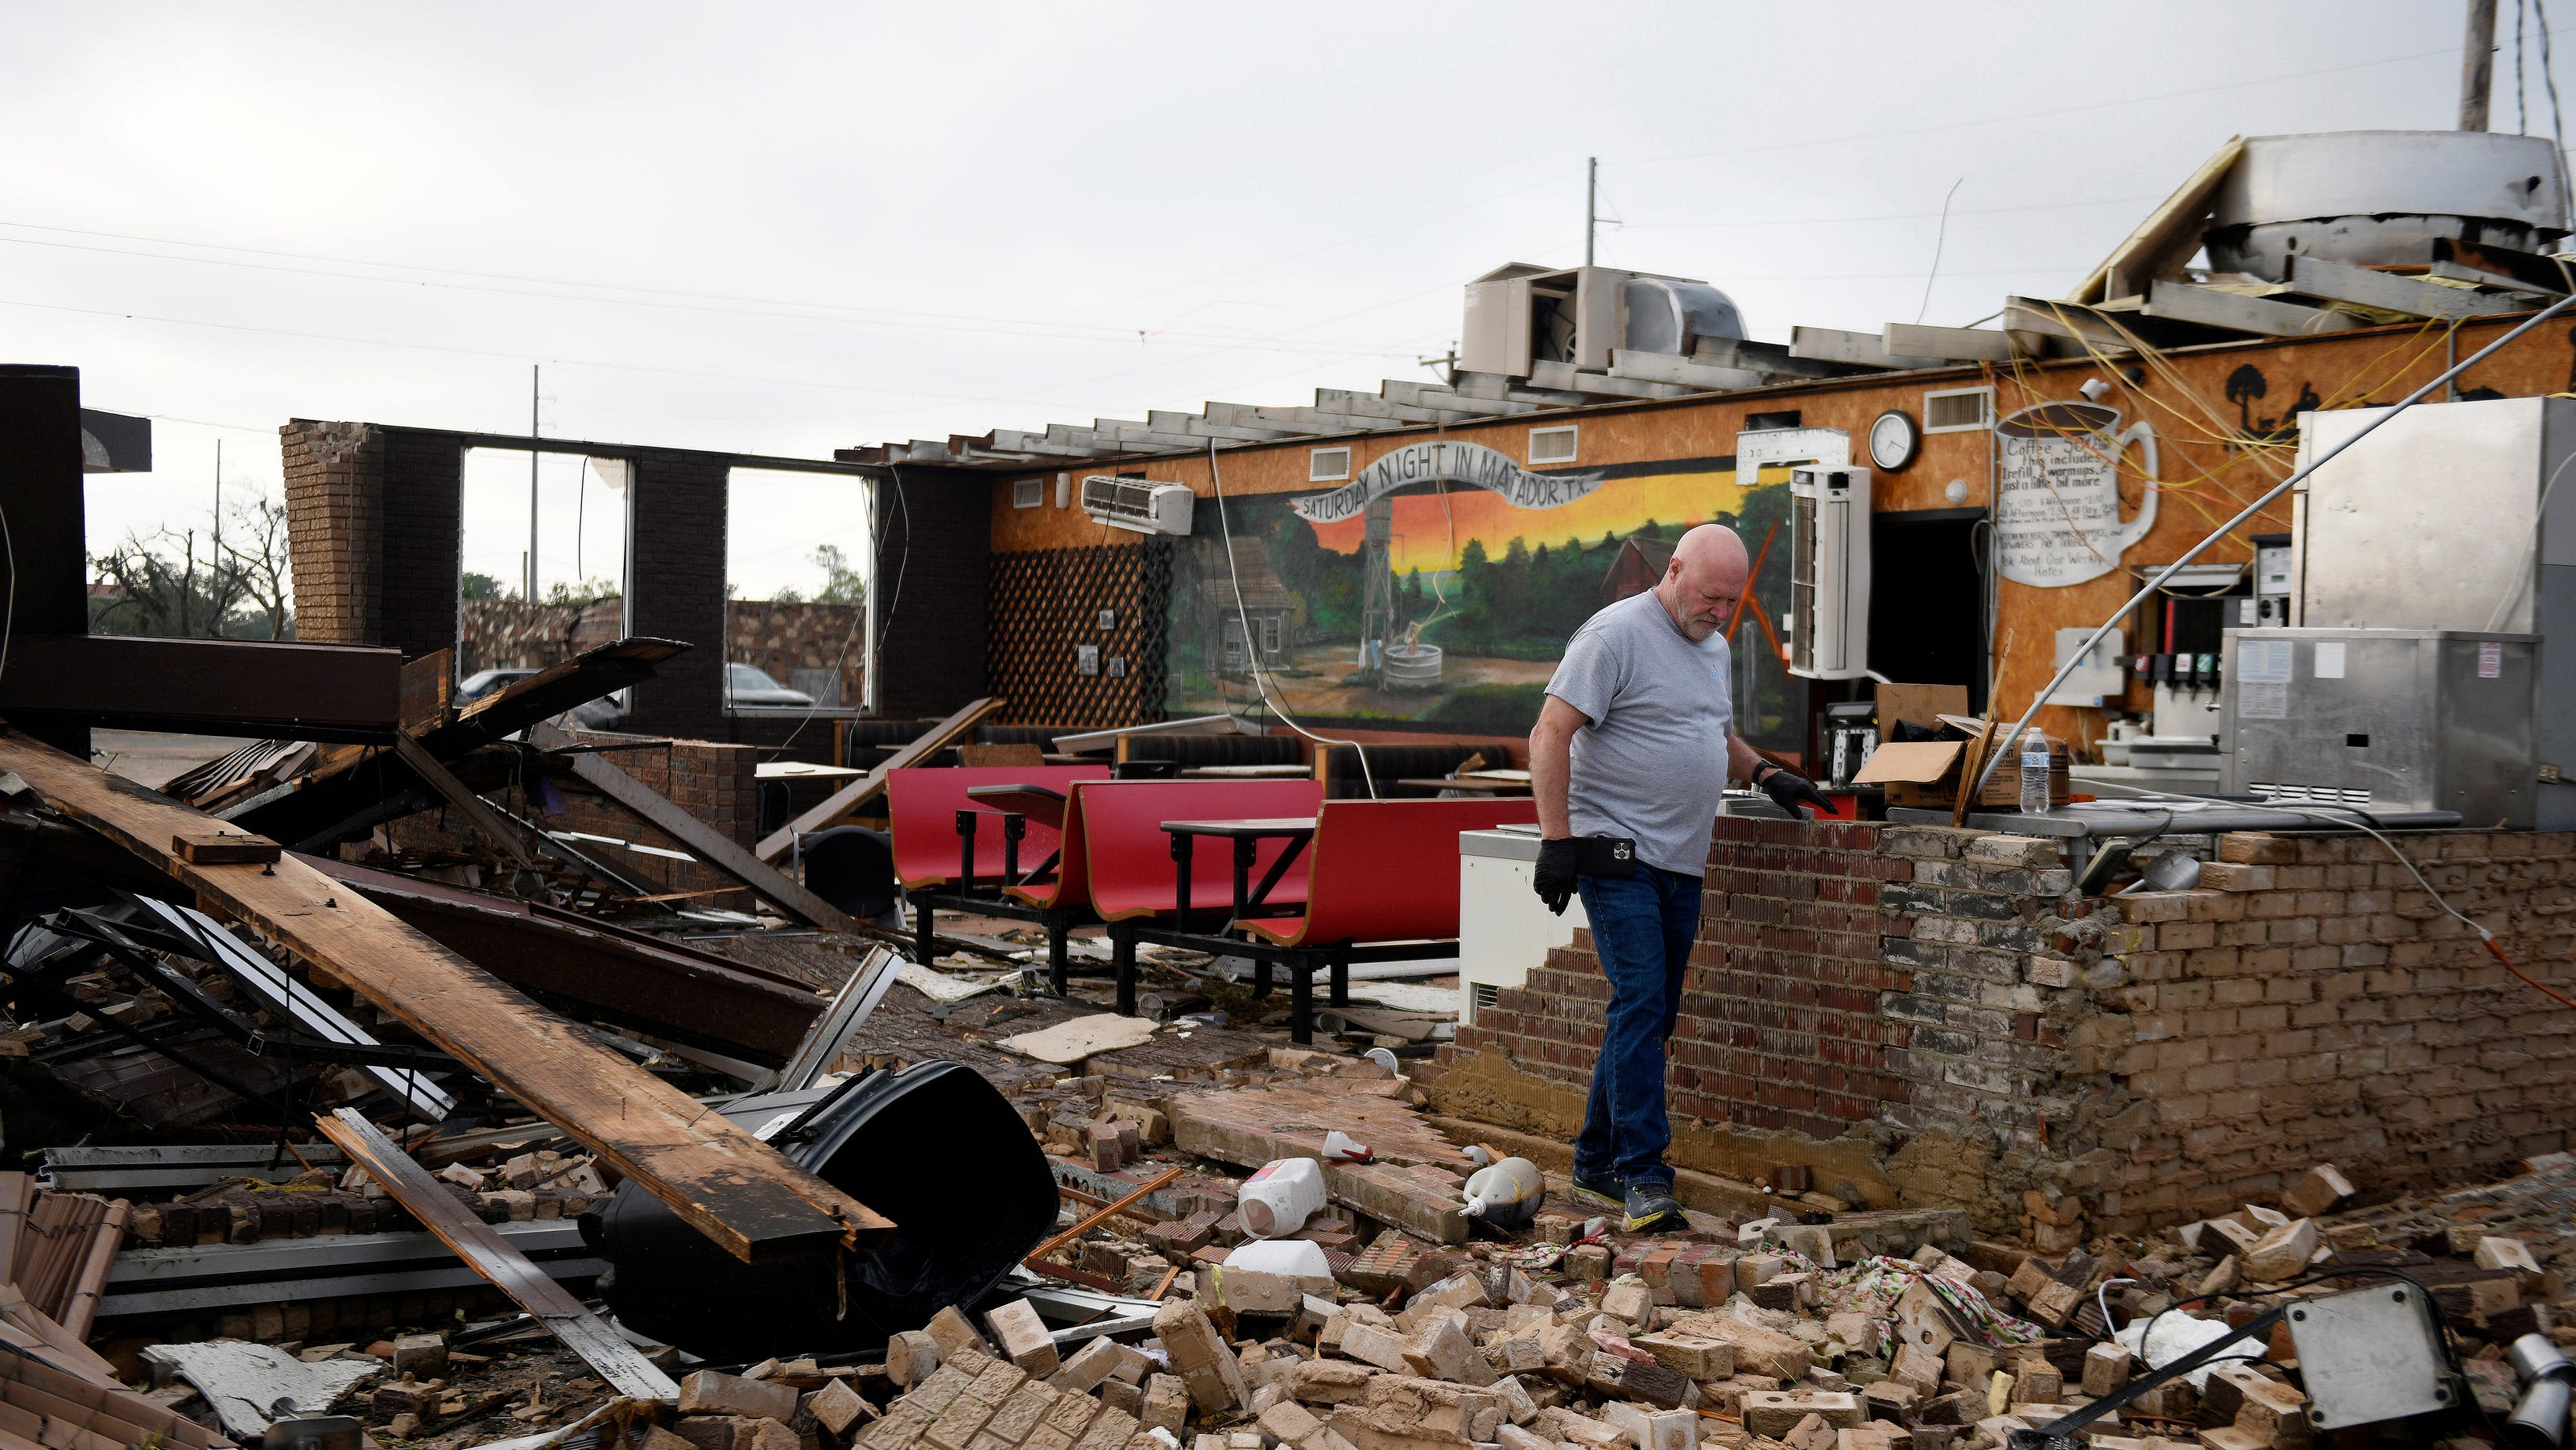 373 tornadoes hit the US in April — nearly double the average. Here's how many hit Texas